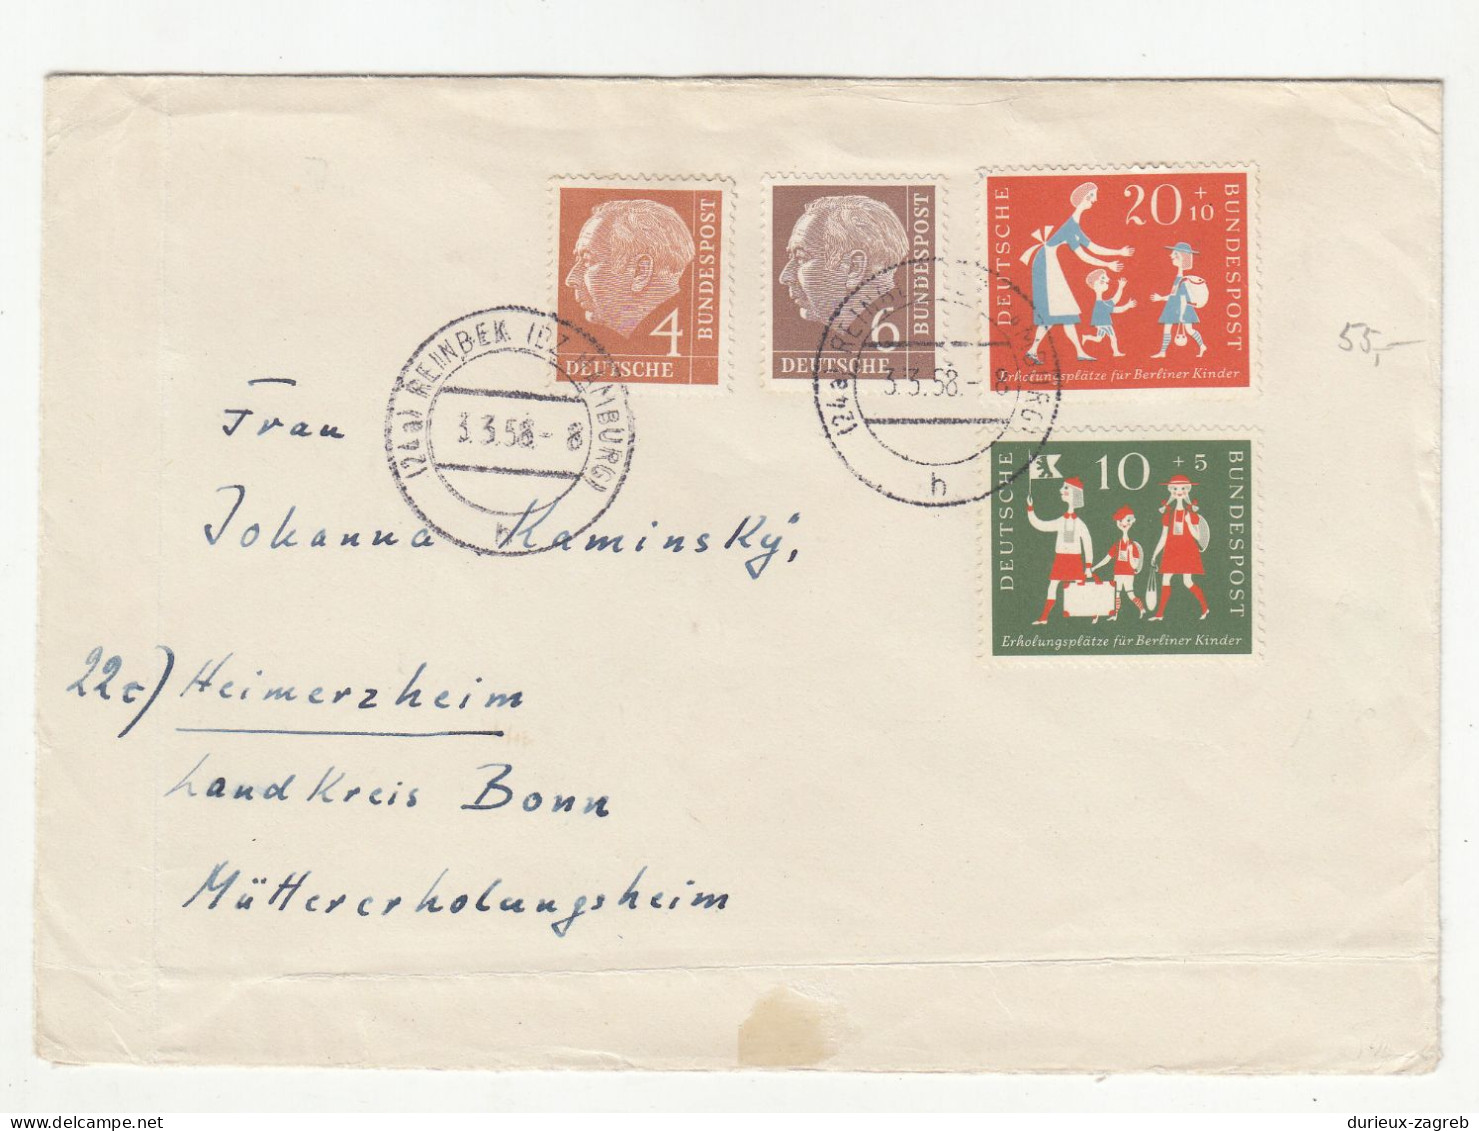 Germany Letter Cover Posted 1958 Reinbek To Himerzheim B240510 - Covers & Documents